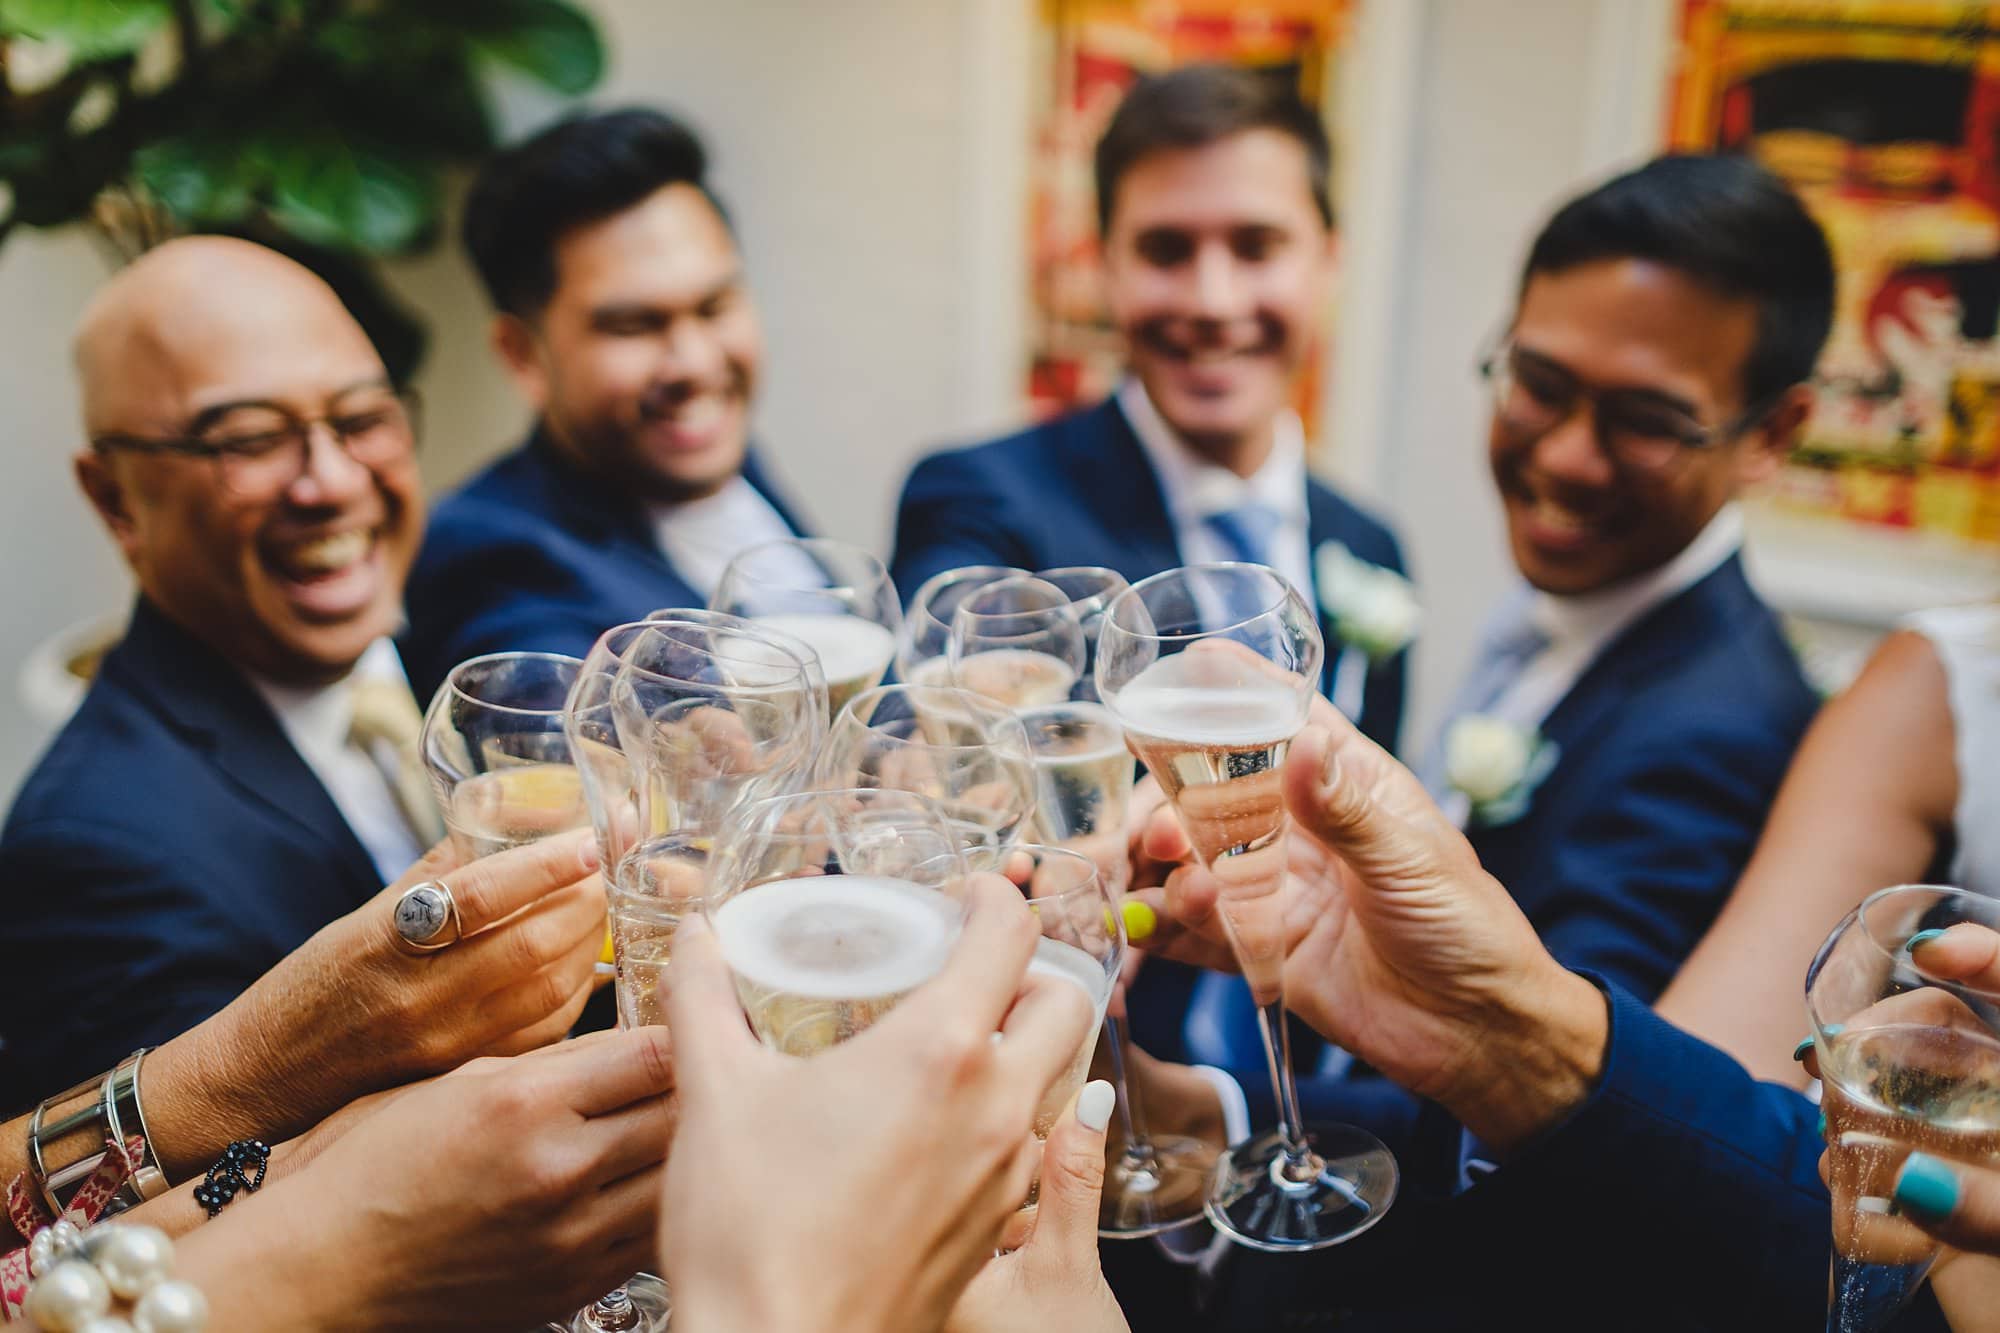 London wedding photography of the grooms and guests bringing their Champagne glasses together - cheers!